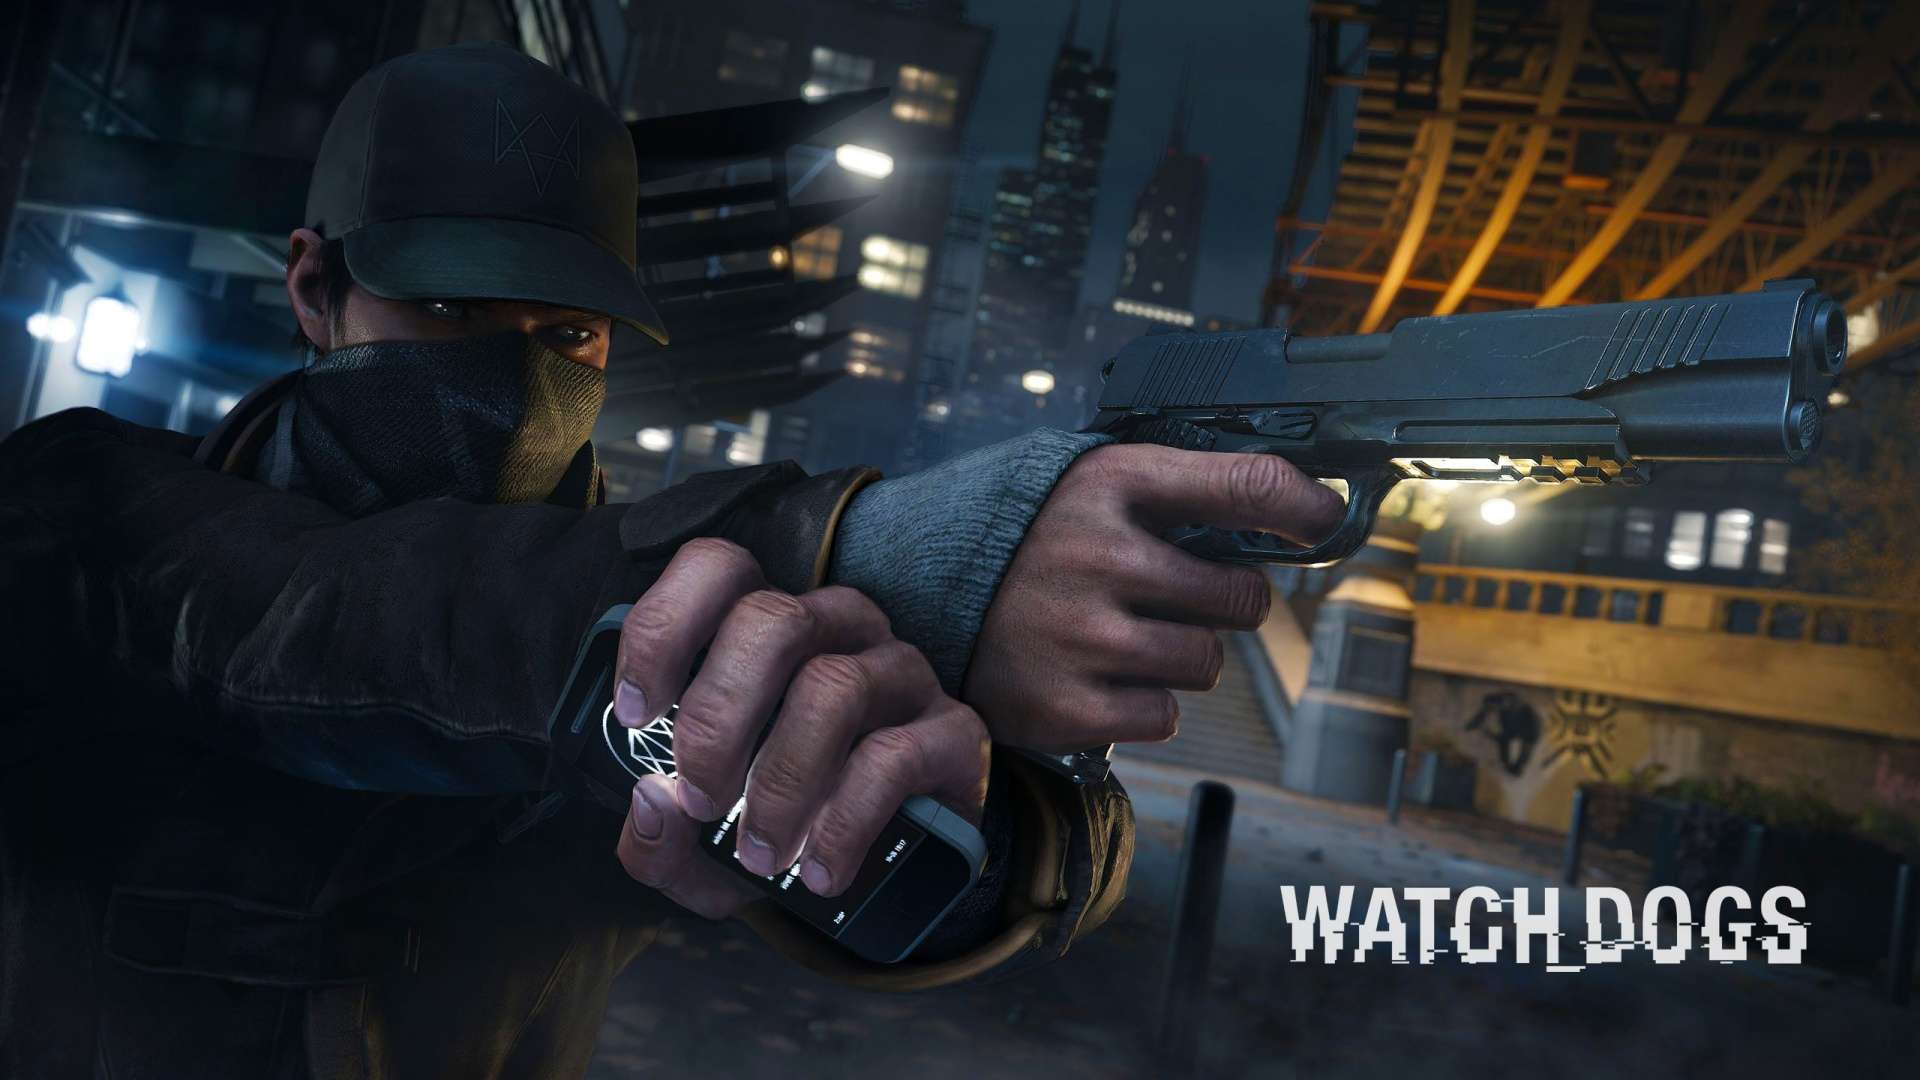 Wallpaper Watch Dogs Game HD 1080p Upload At March